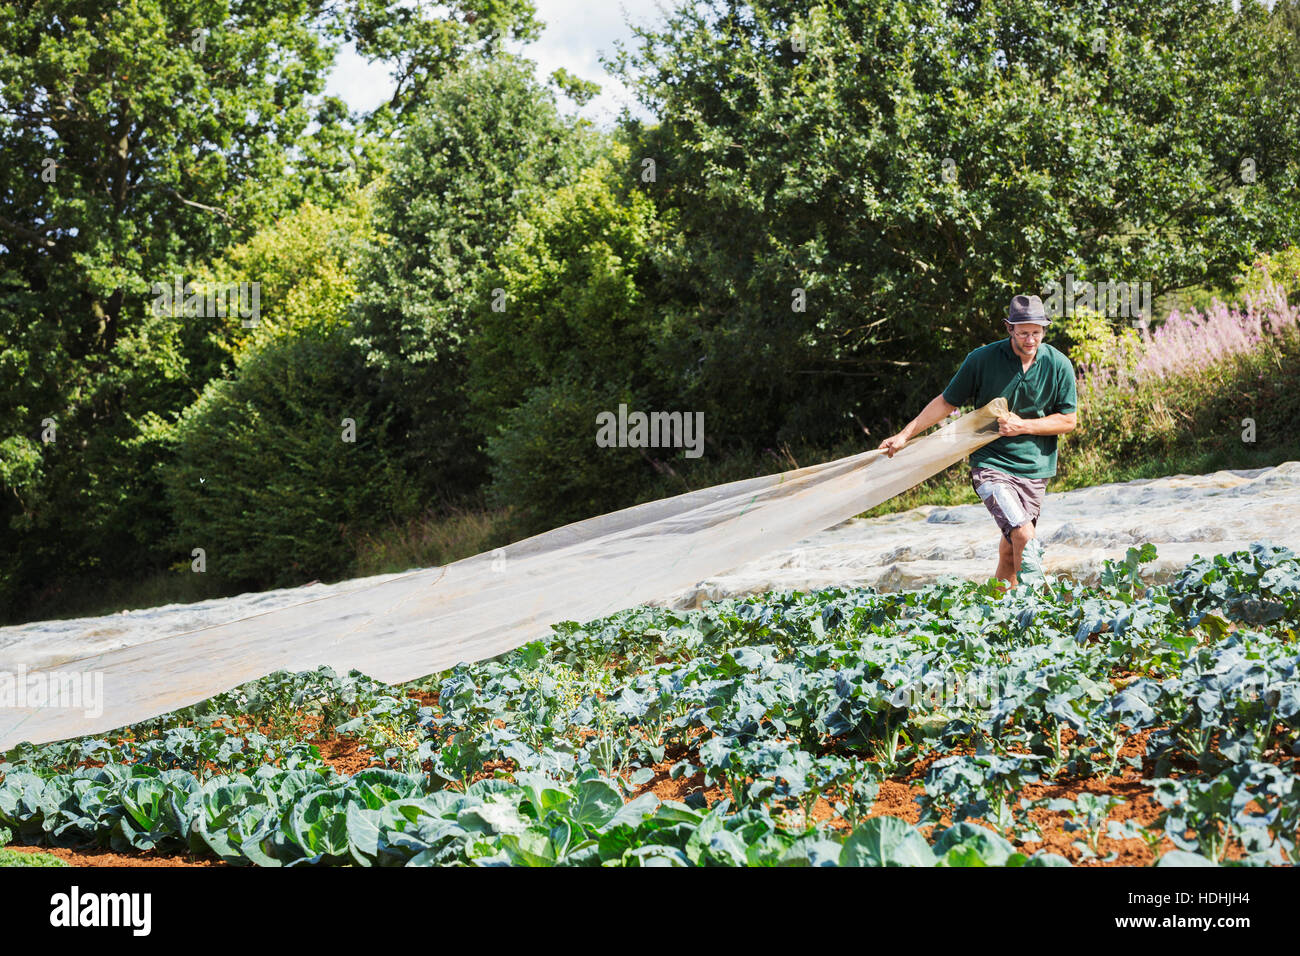 A man pulling a sheet of horticultural fleece over a crop of curly kale plants. Stock Photo